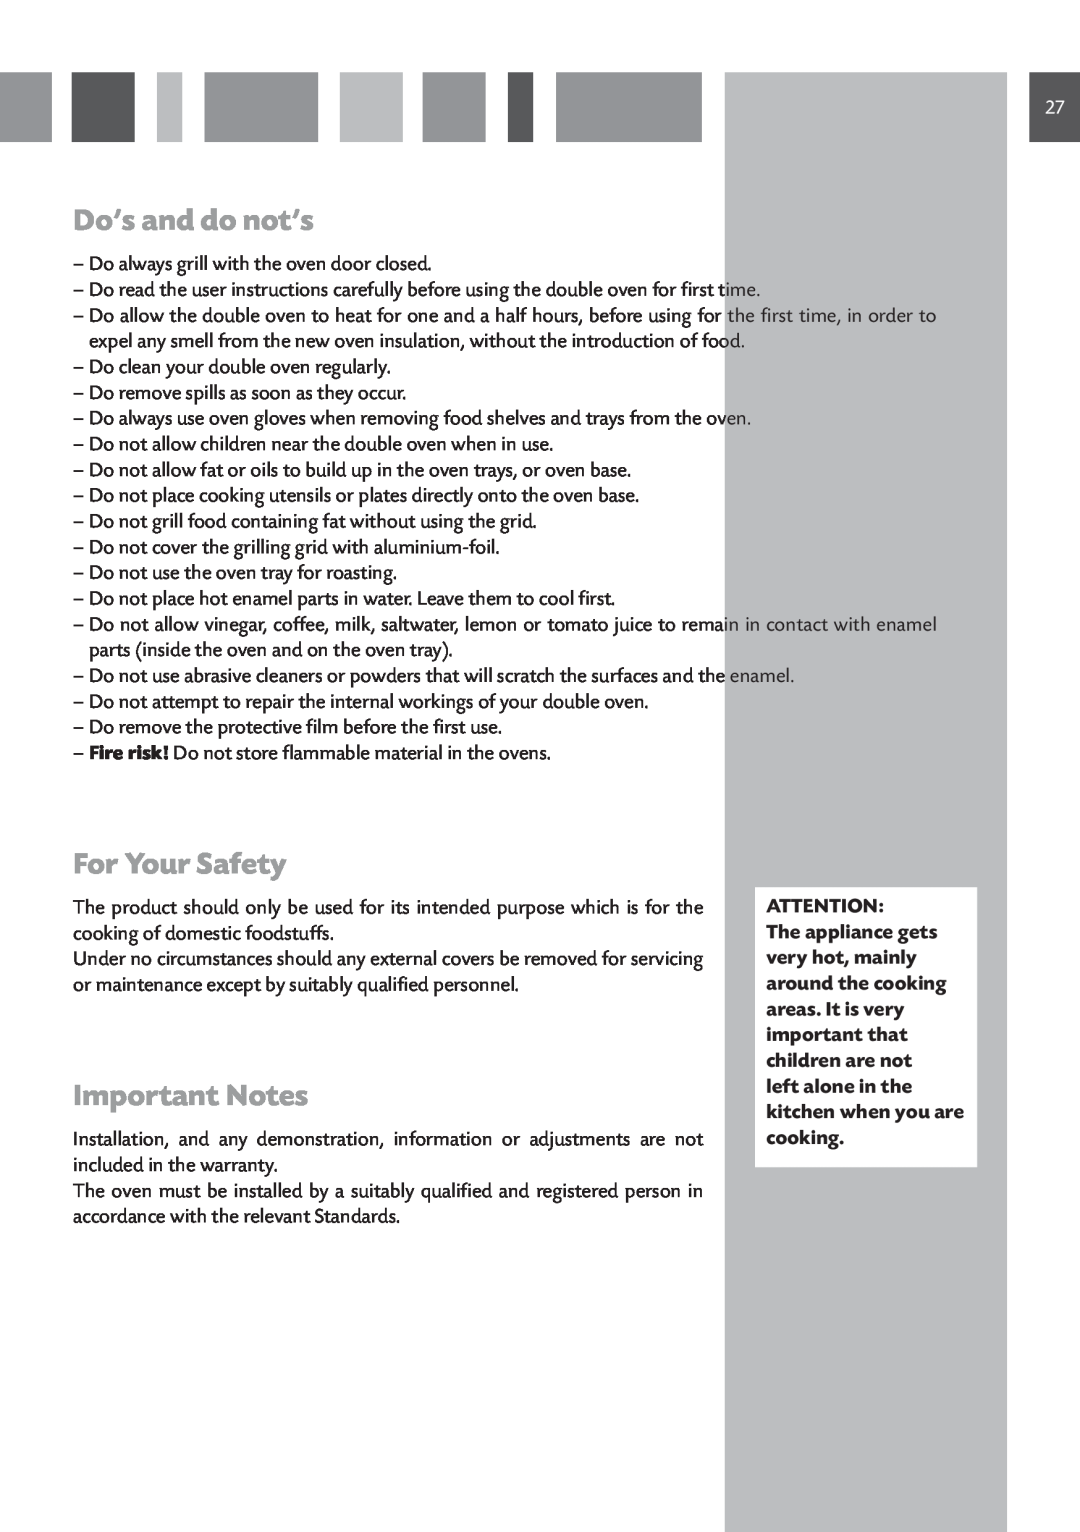 CDA DV 770 manual Do’s and do not’s, For Your Safety, Important Notes 